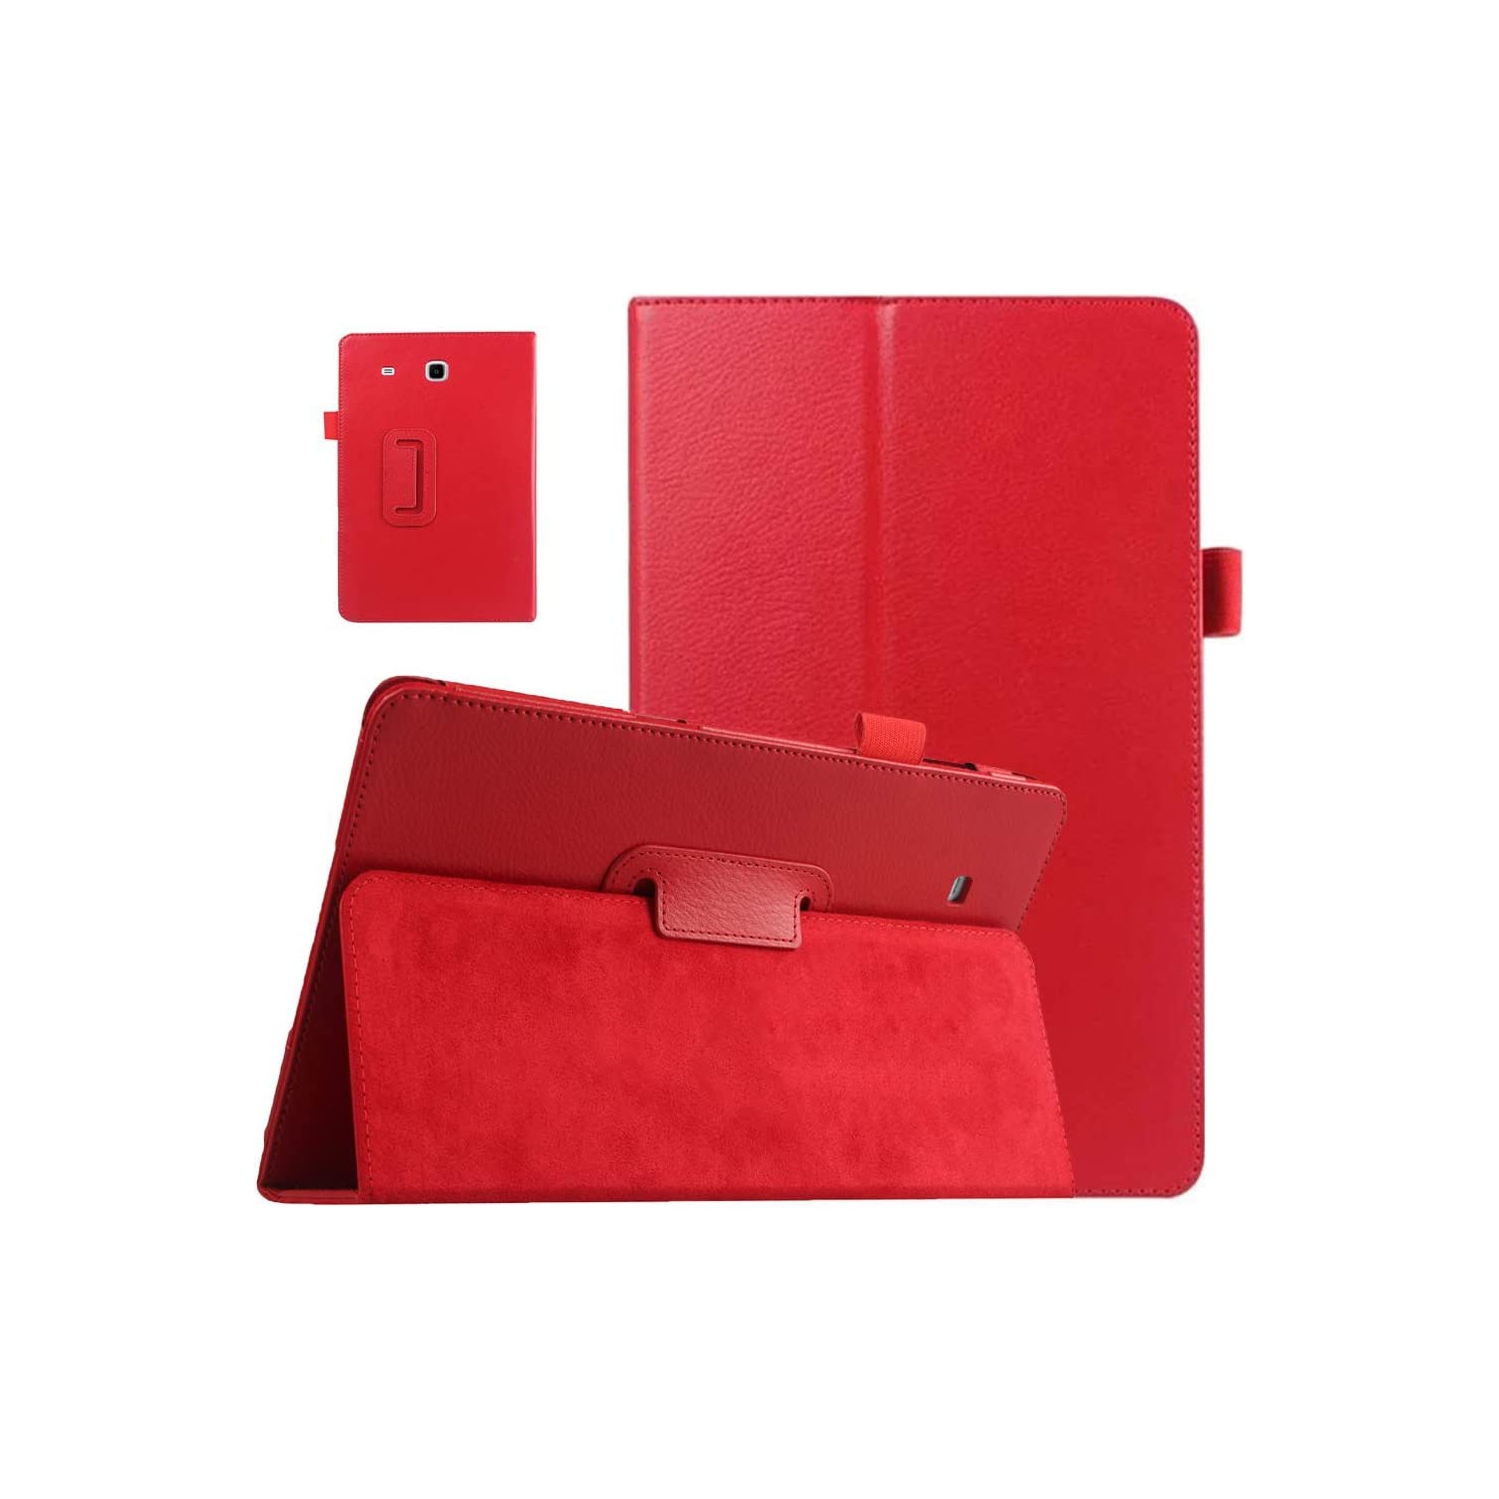 E Case for Tab E 9.6 Case Model T560, Slim Leather Folio Stand Case for Samsung Galaxy Tab E 9.6 Inch 2015 Released Tablet (SM-T560 T561 T565 and SM-T567V), Red